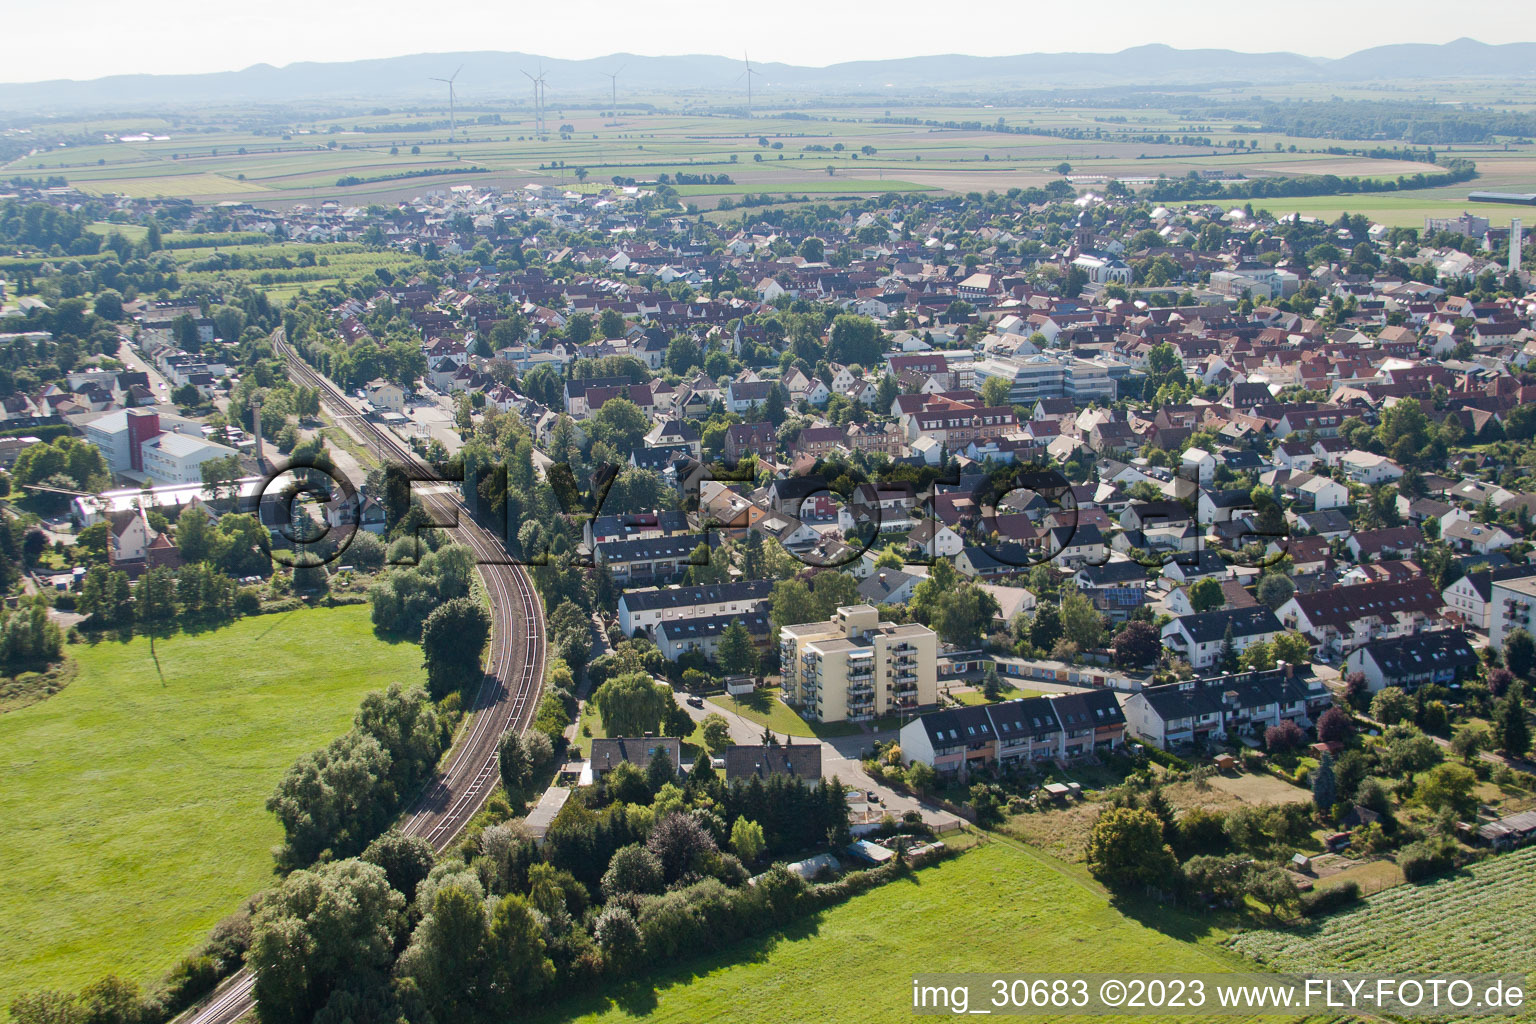 Bird's eye view of From the southeast in Kandel in the state Rhineland-Palatinate, Germany